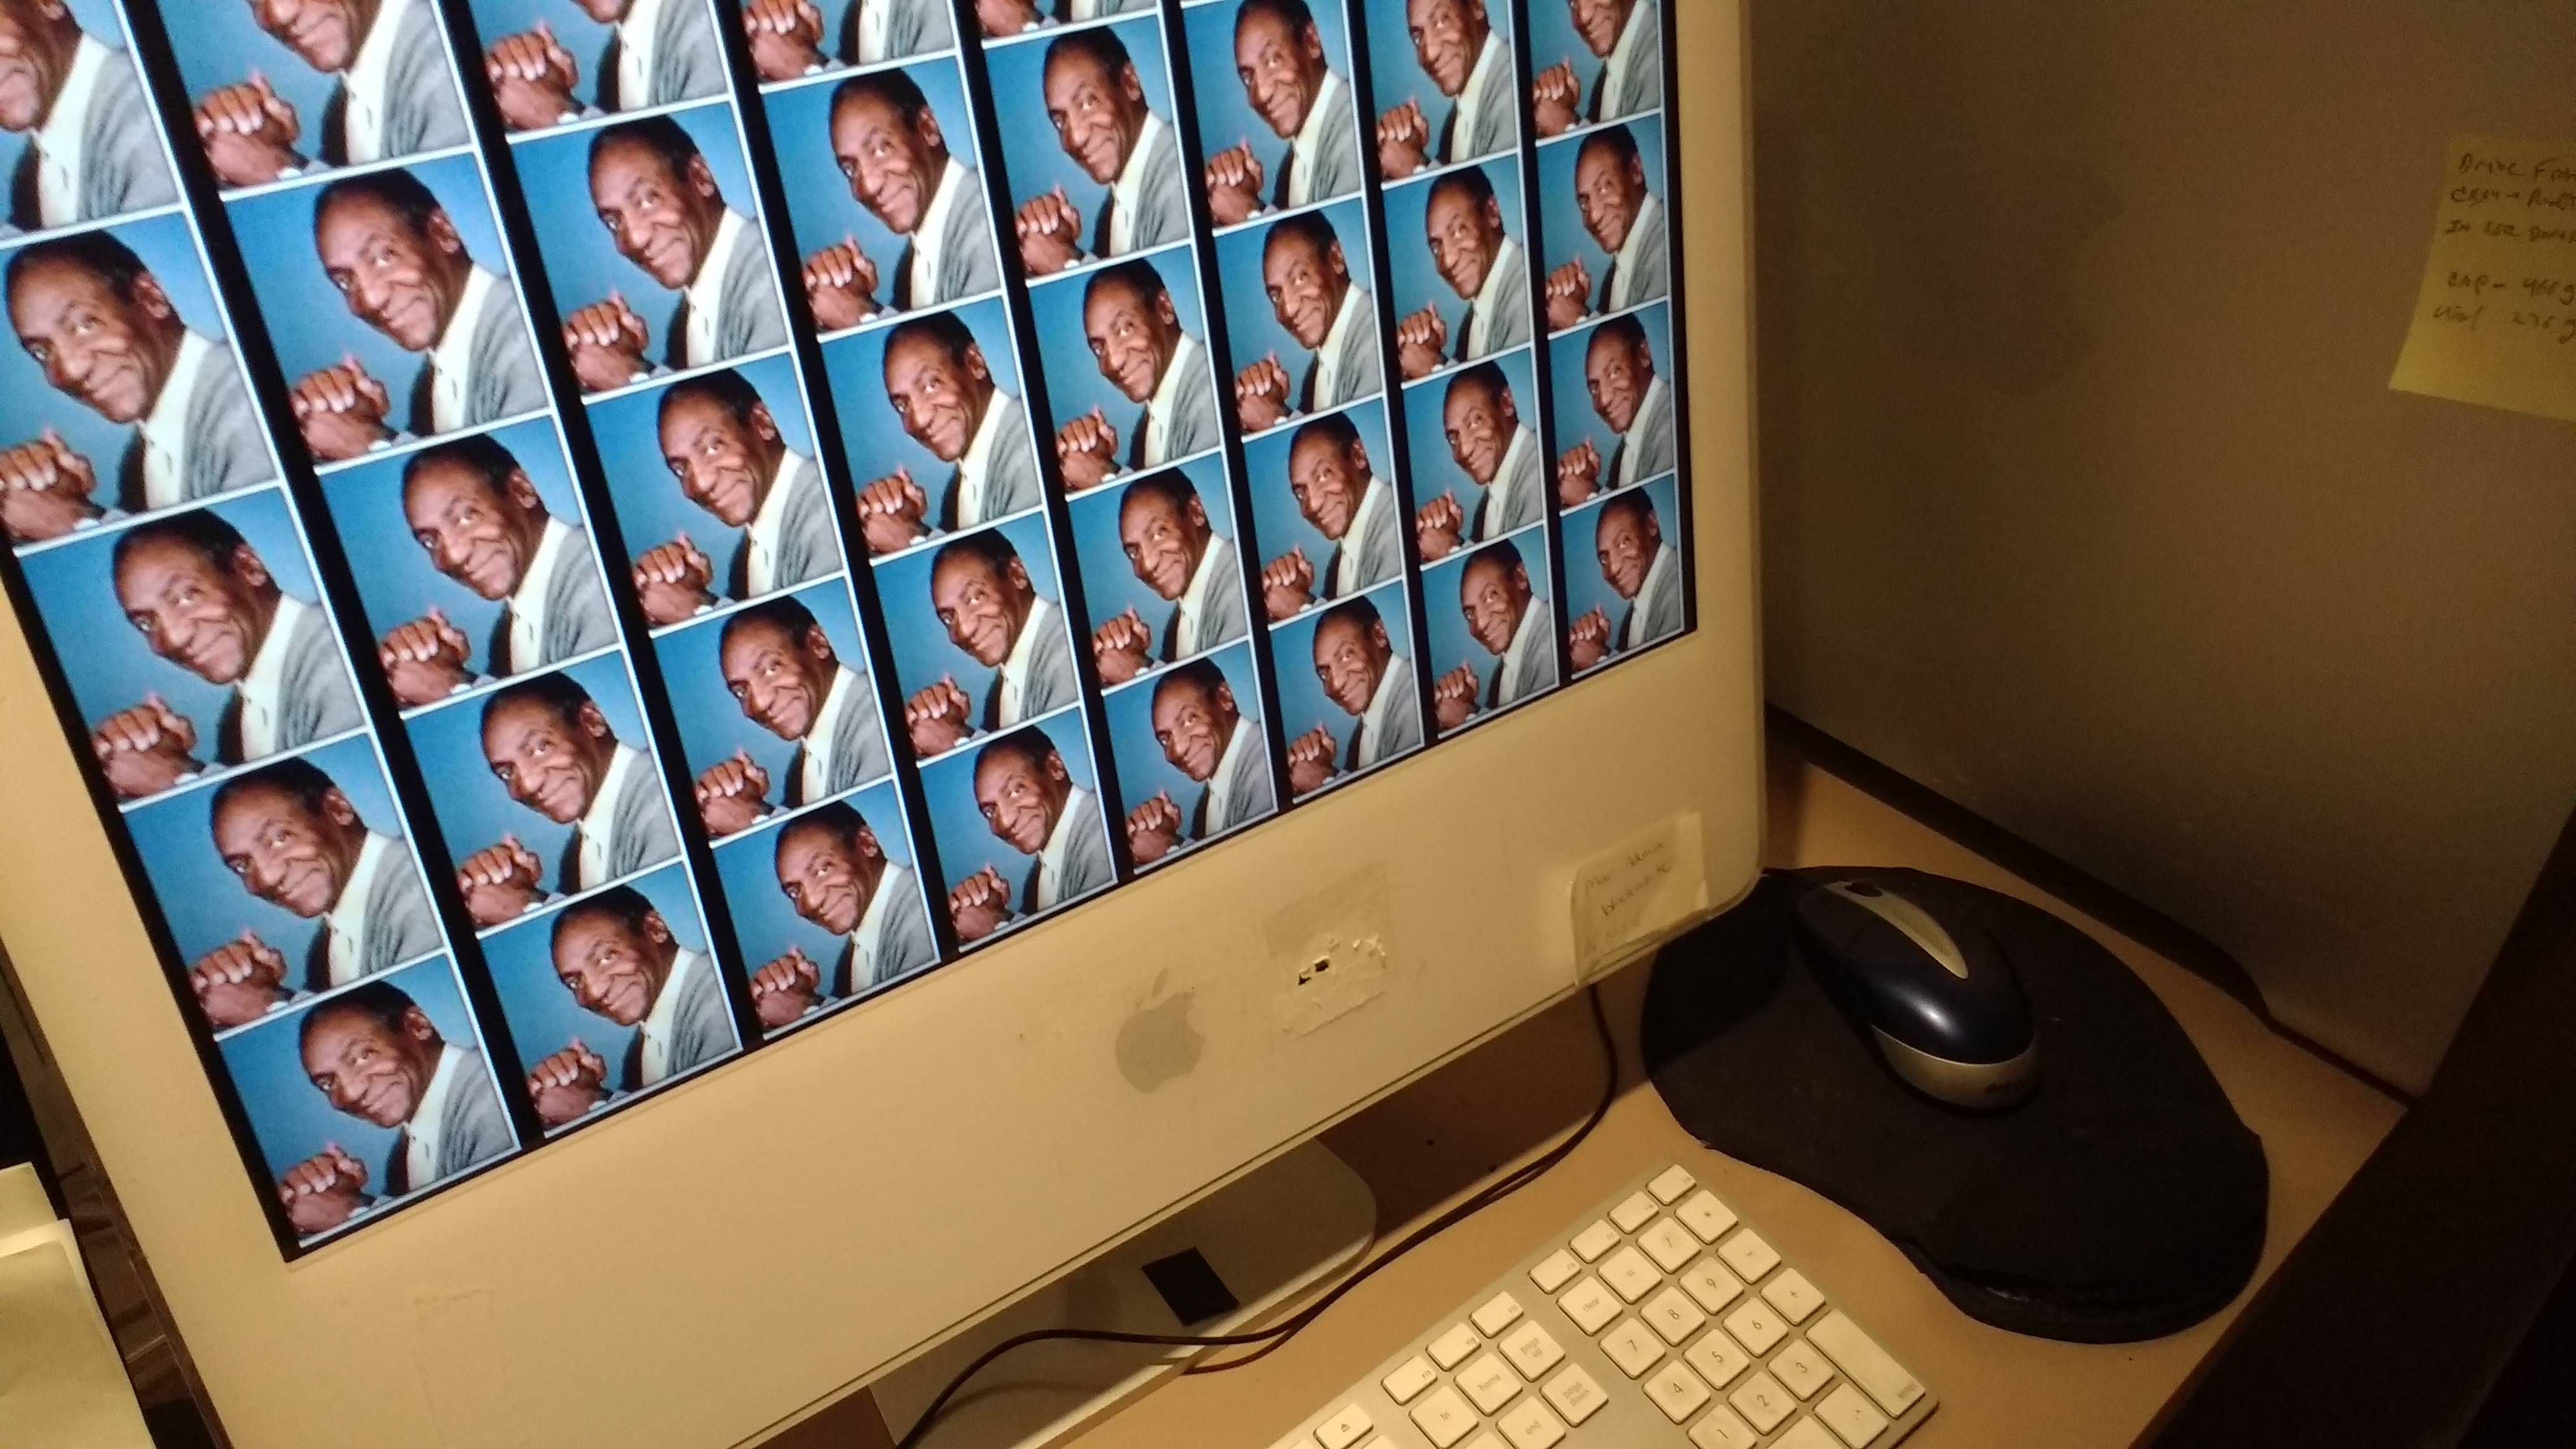 My parent's screensaver is just a bunch of pictures of Bill Cosby. They don't know why or how to change it.